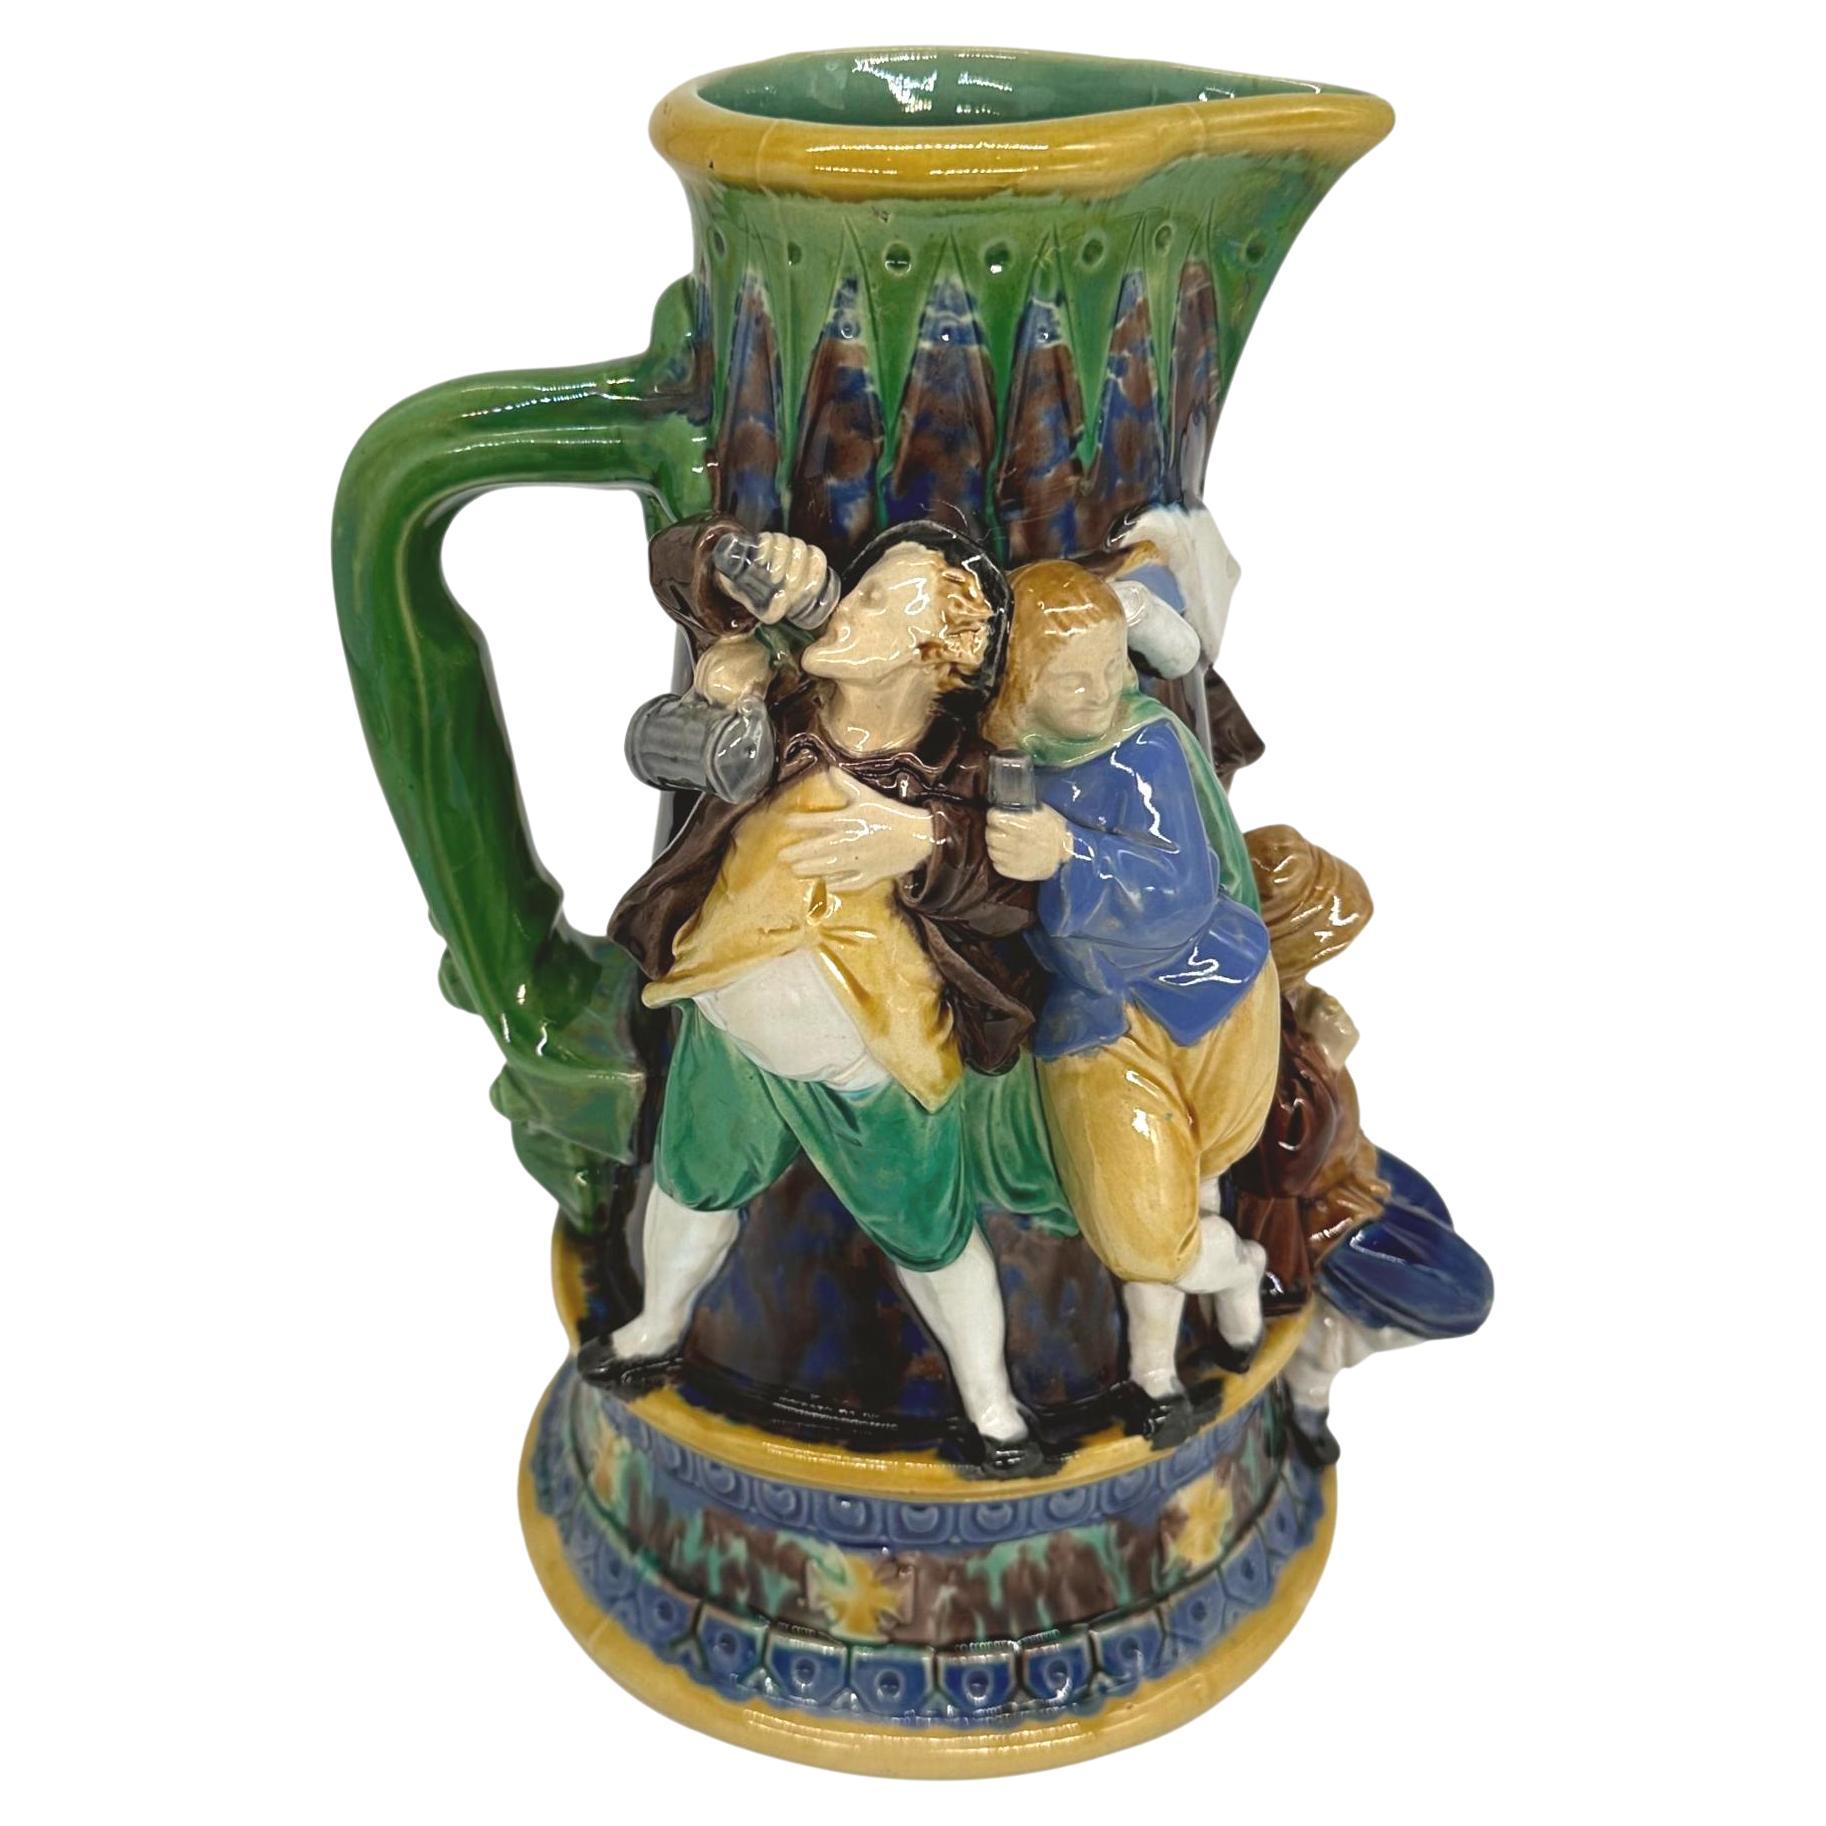 A Minton Majolica Ale Jug with Five Revelers in Medieval Dress, dated 1862